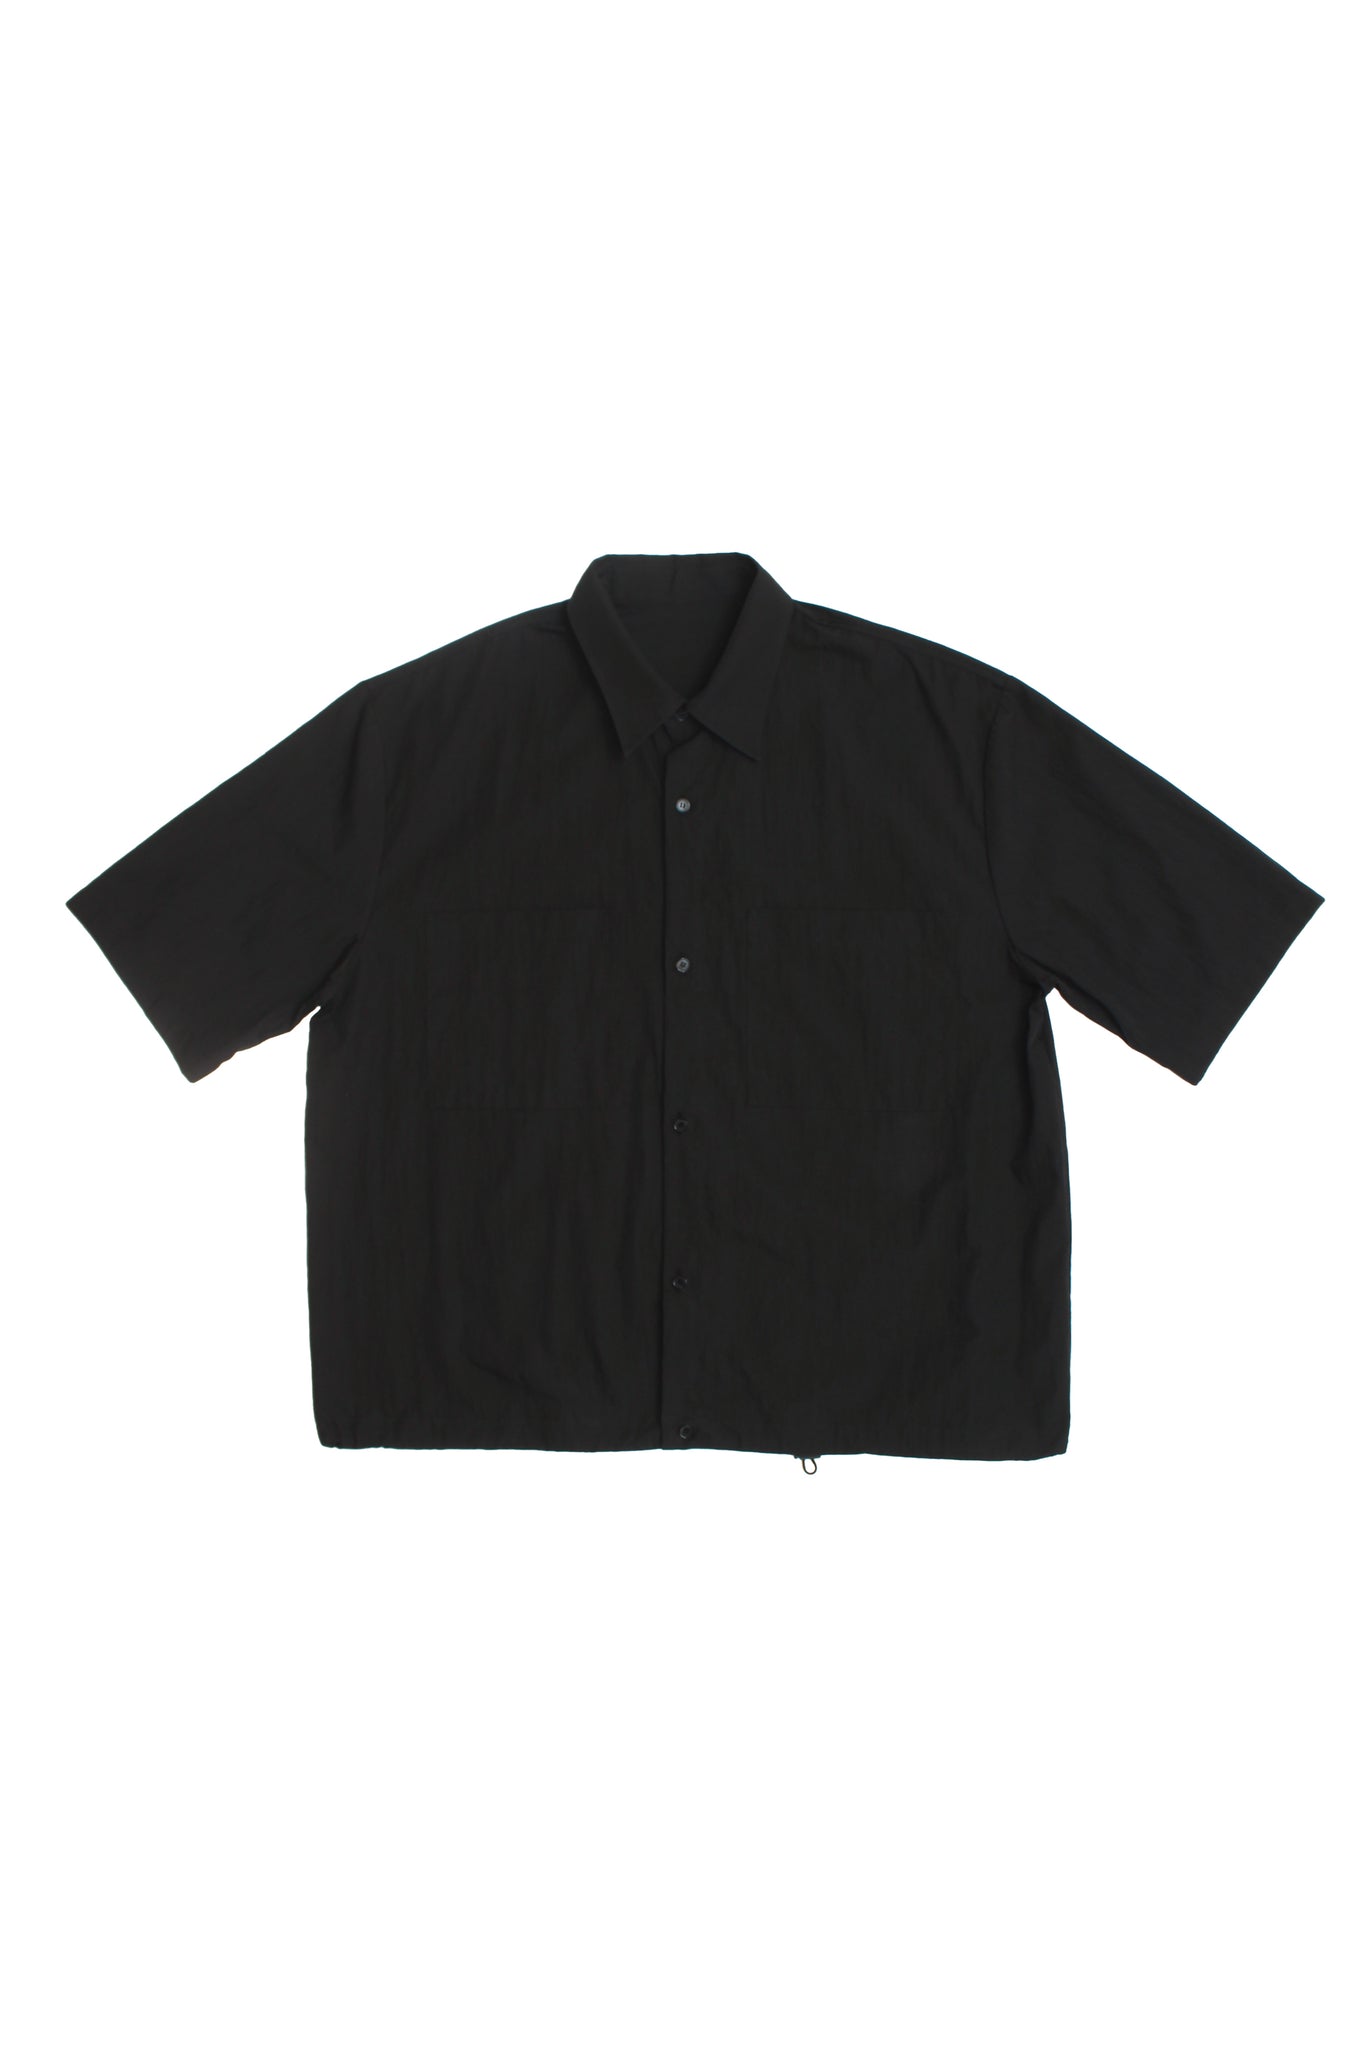 Two Pocket String Shirts in Black